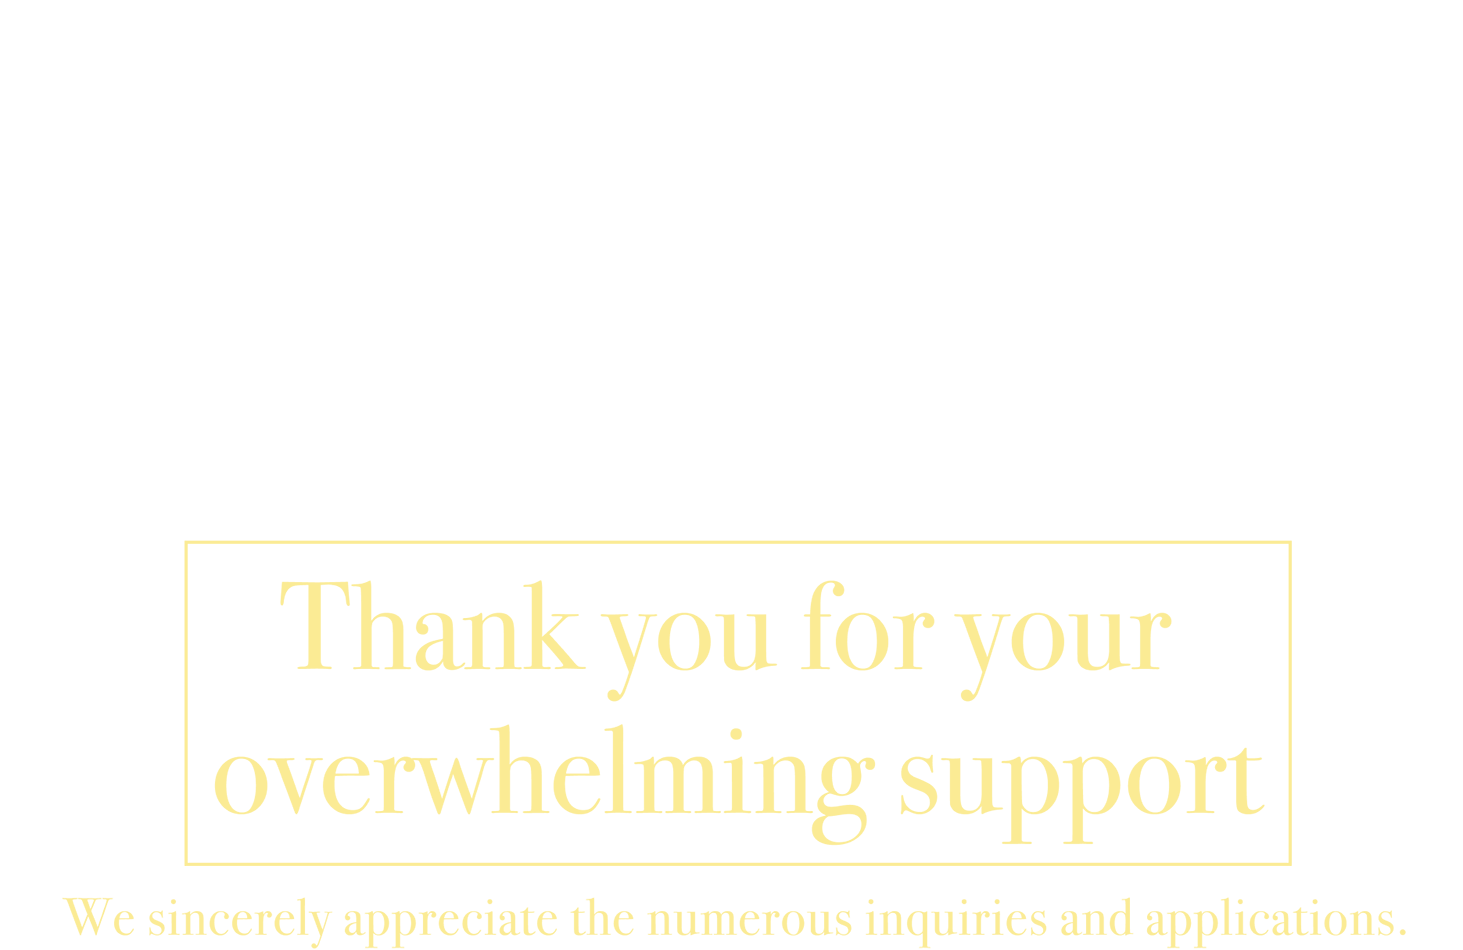 Would you like to make the most of your IPv4 addresses? GMO BRAND SECURITY offers an IPv4 address bulk purchase service. Thank you for your overwhelming support. We sincerely appreciate the numerous inquiries and applications.